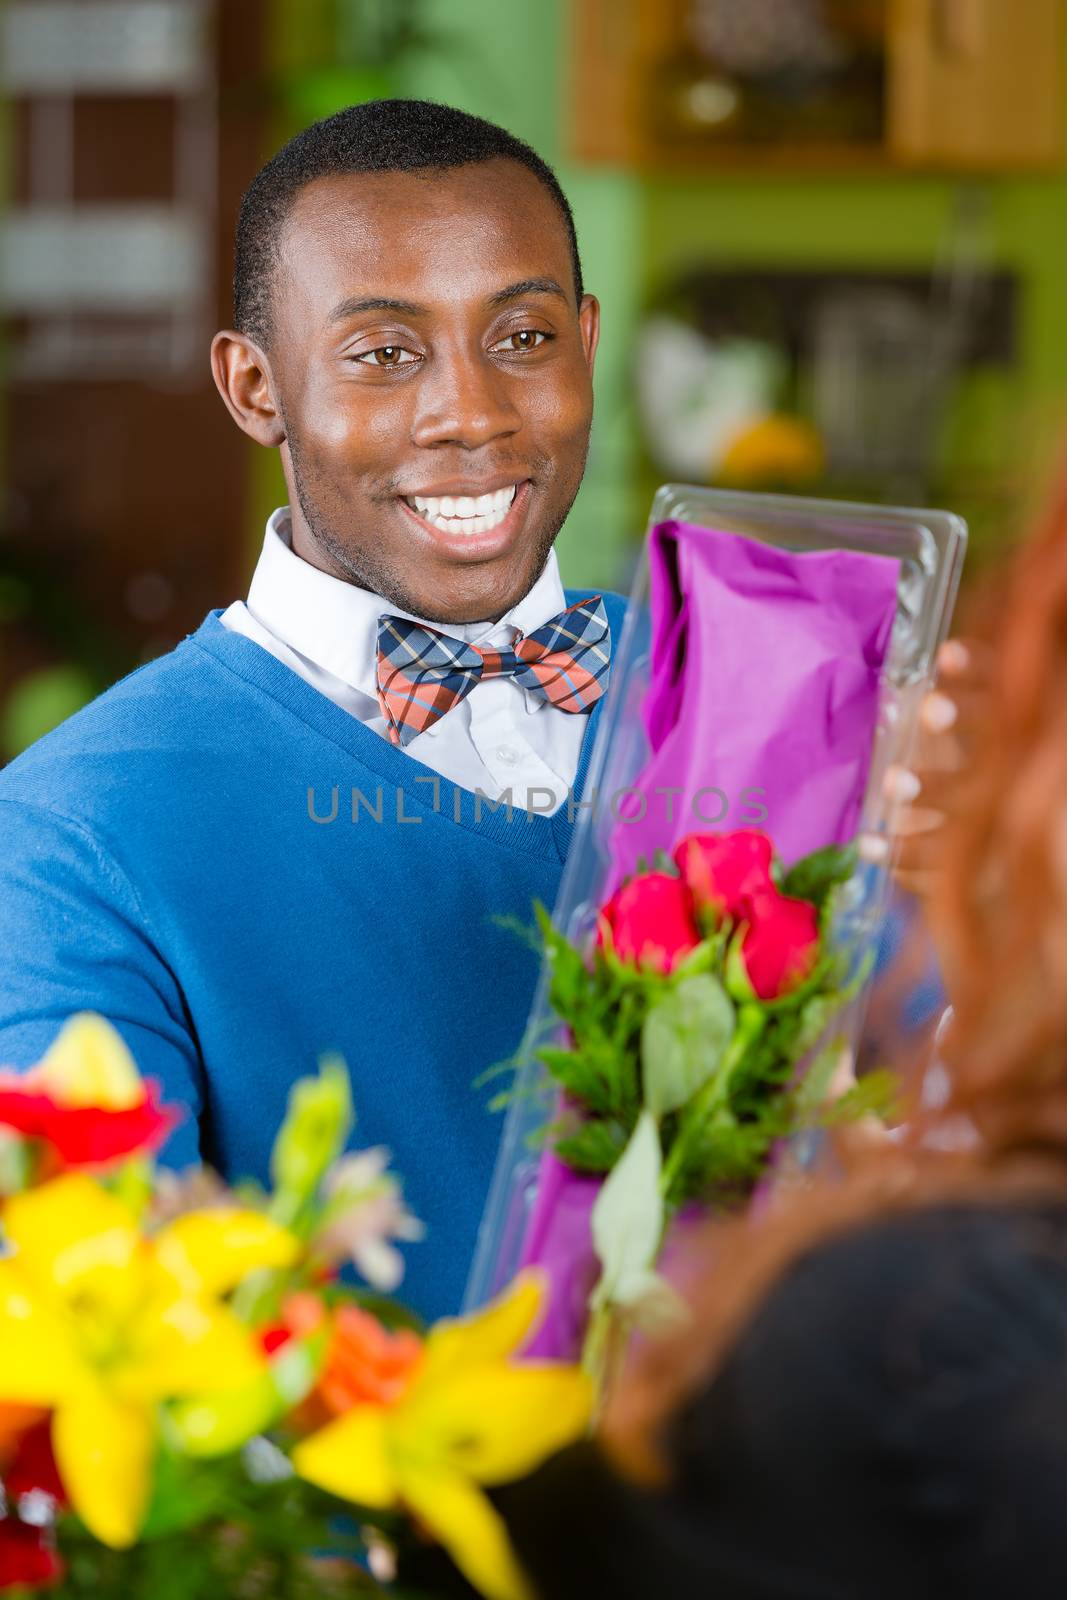 Handsome Man in Flower Shop Buys Roses by Creatista